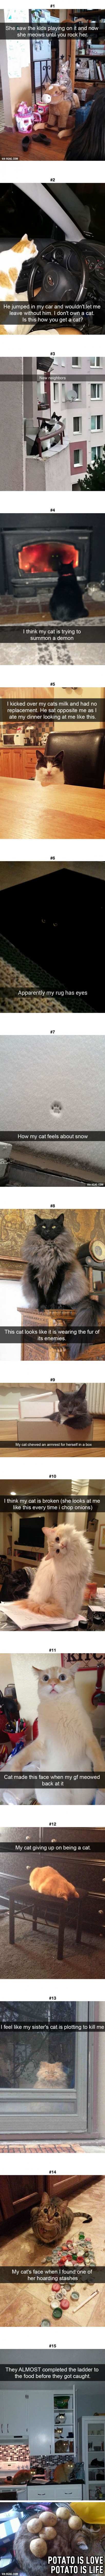 15 Hilarious Cat Snapchats That You Need To See Right Meow